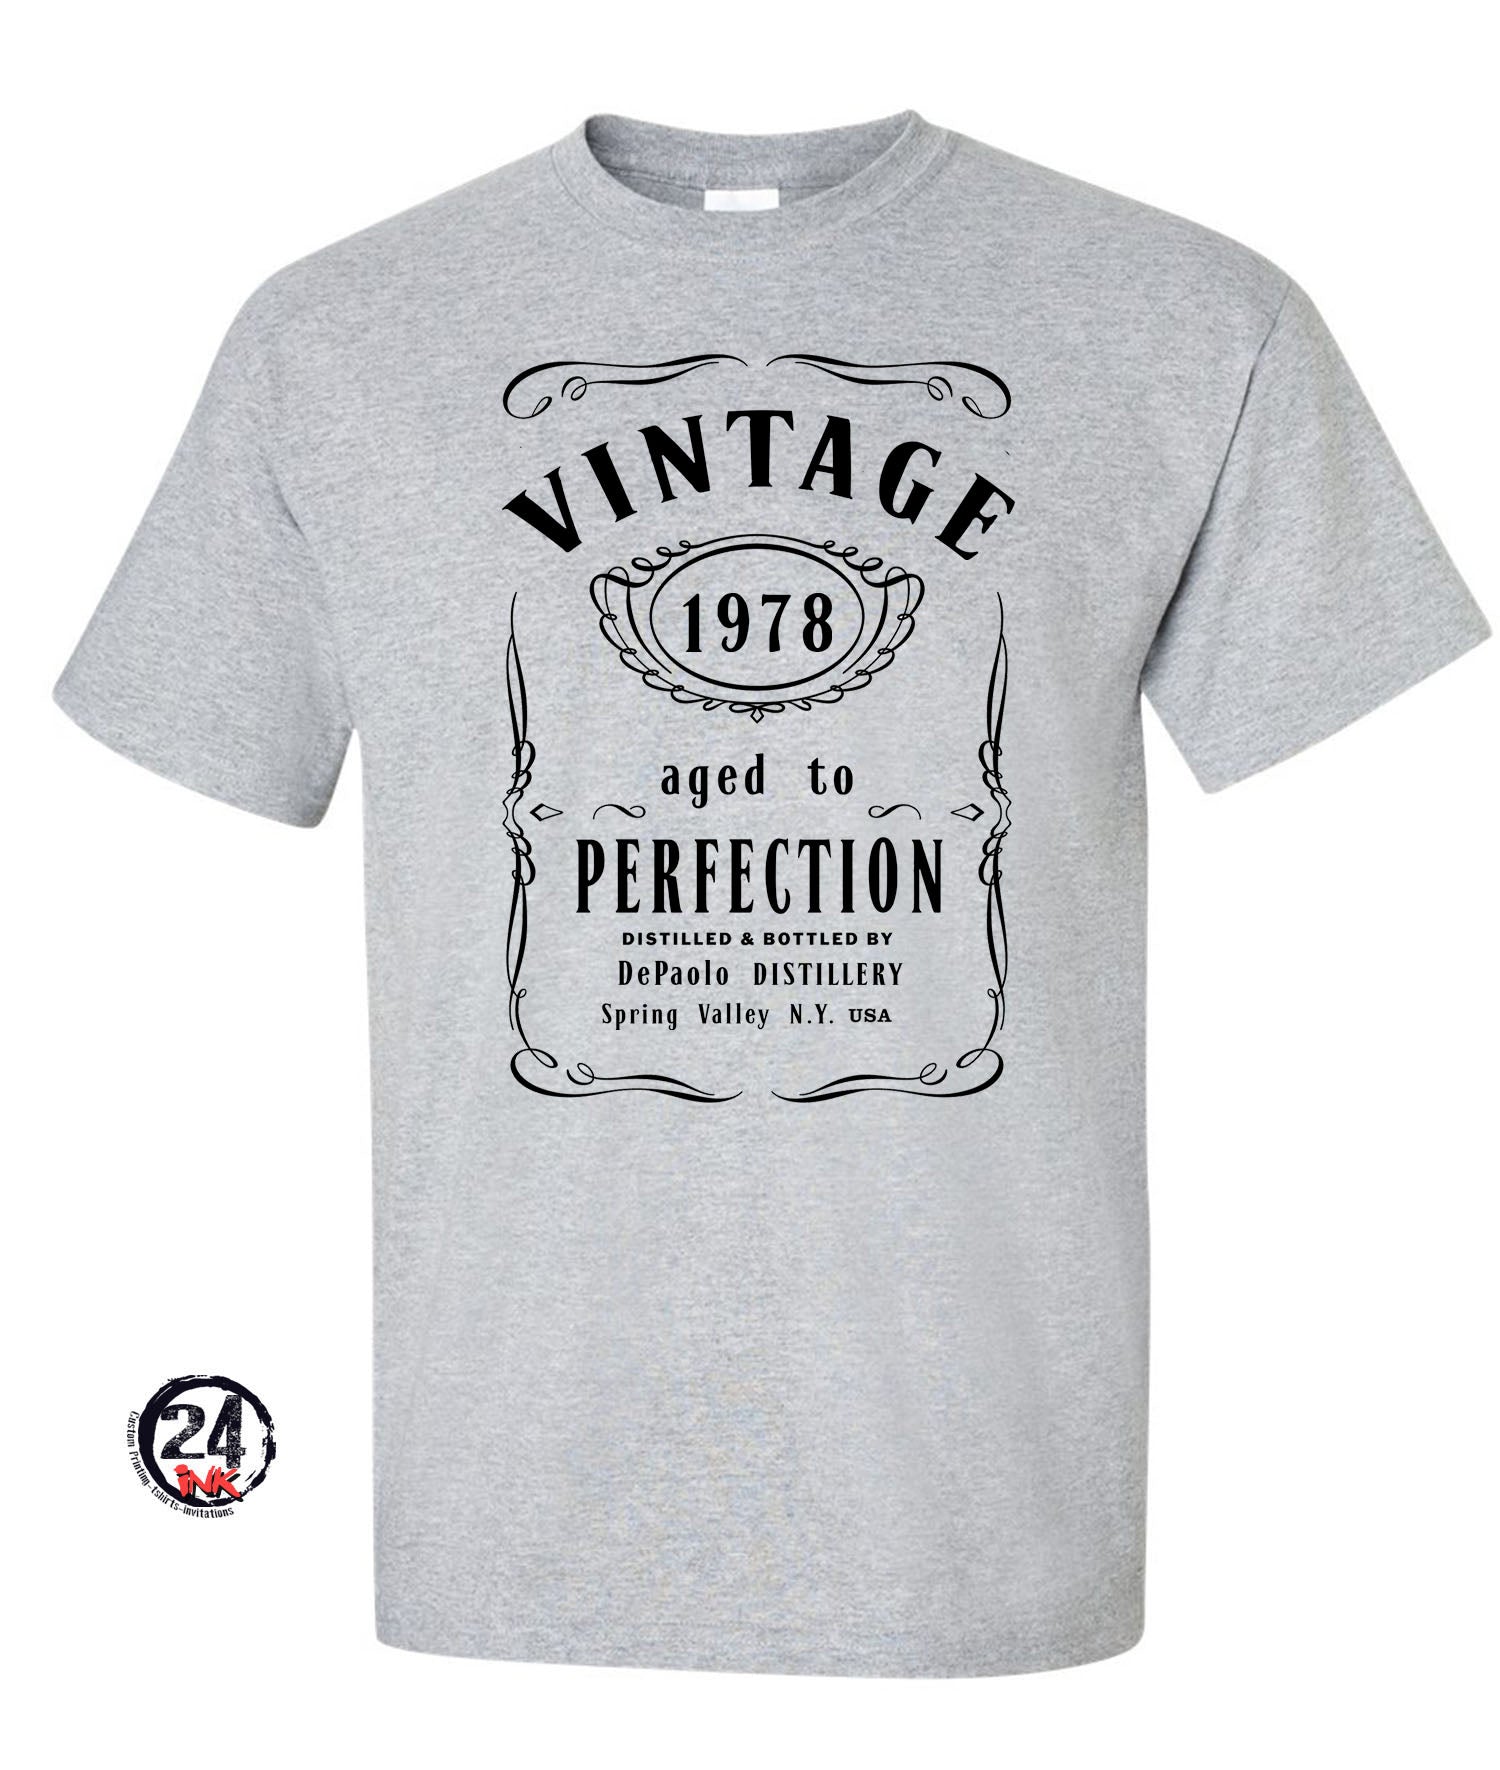 Vintage Limited Edition Shirt